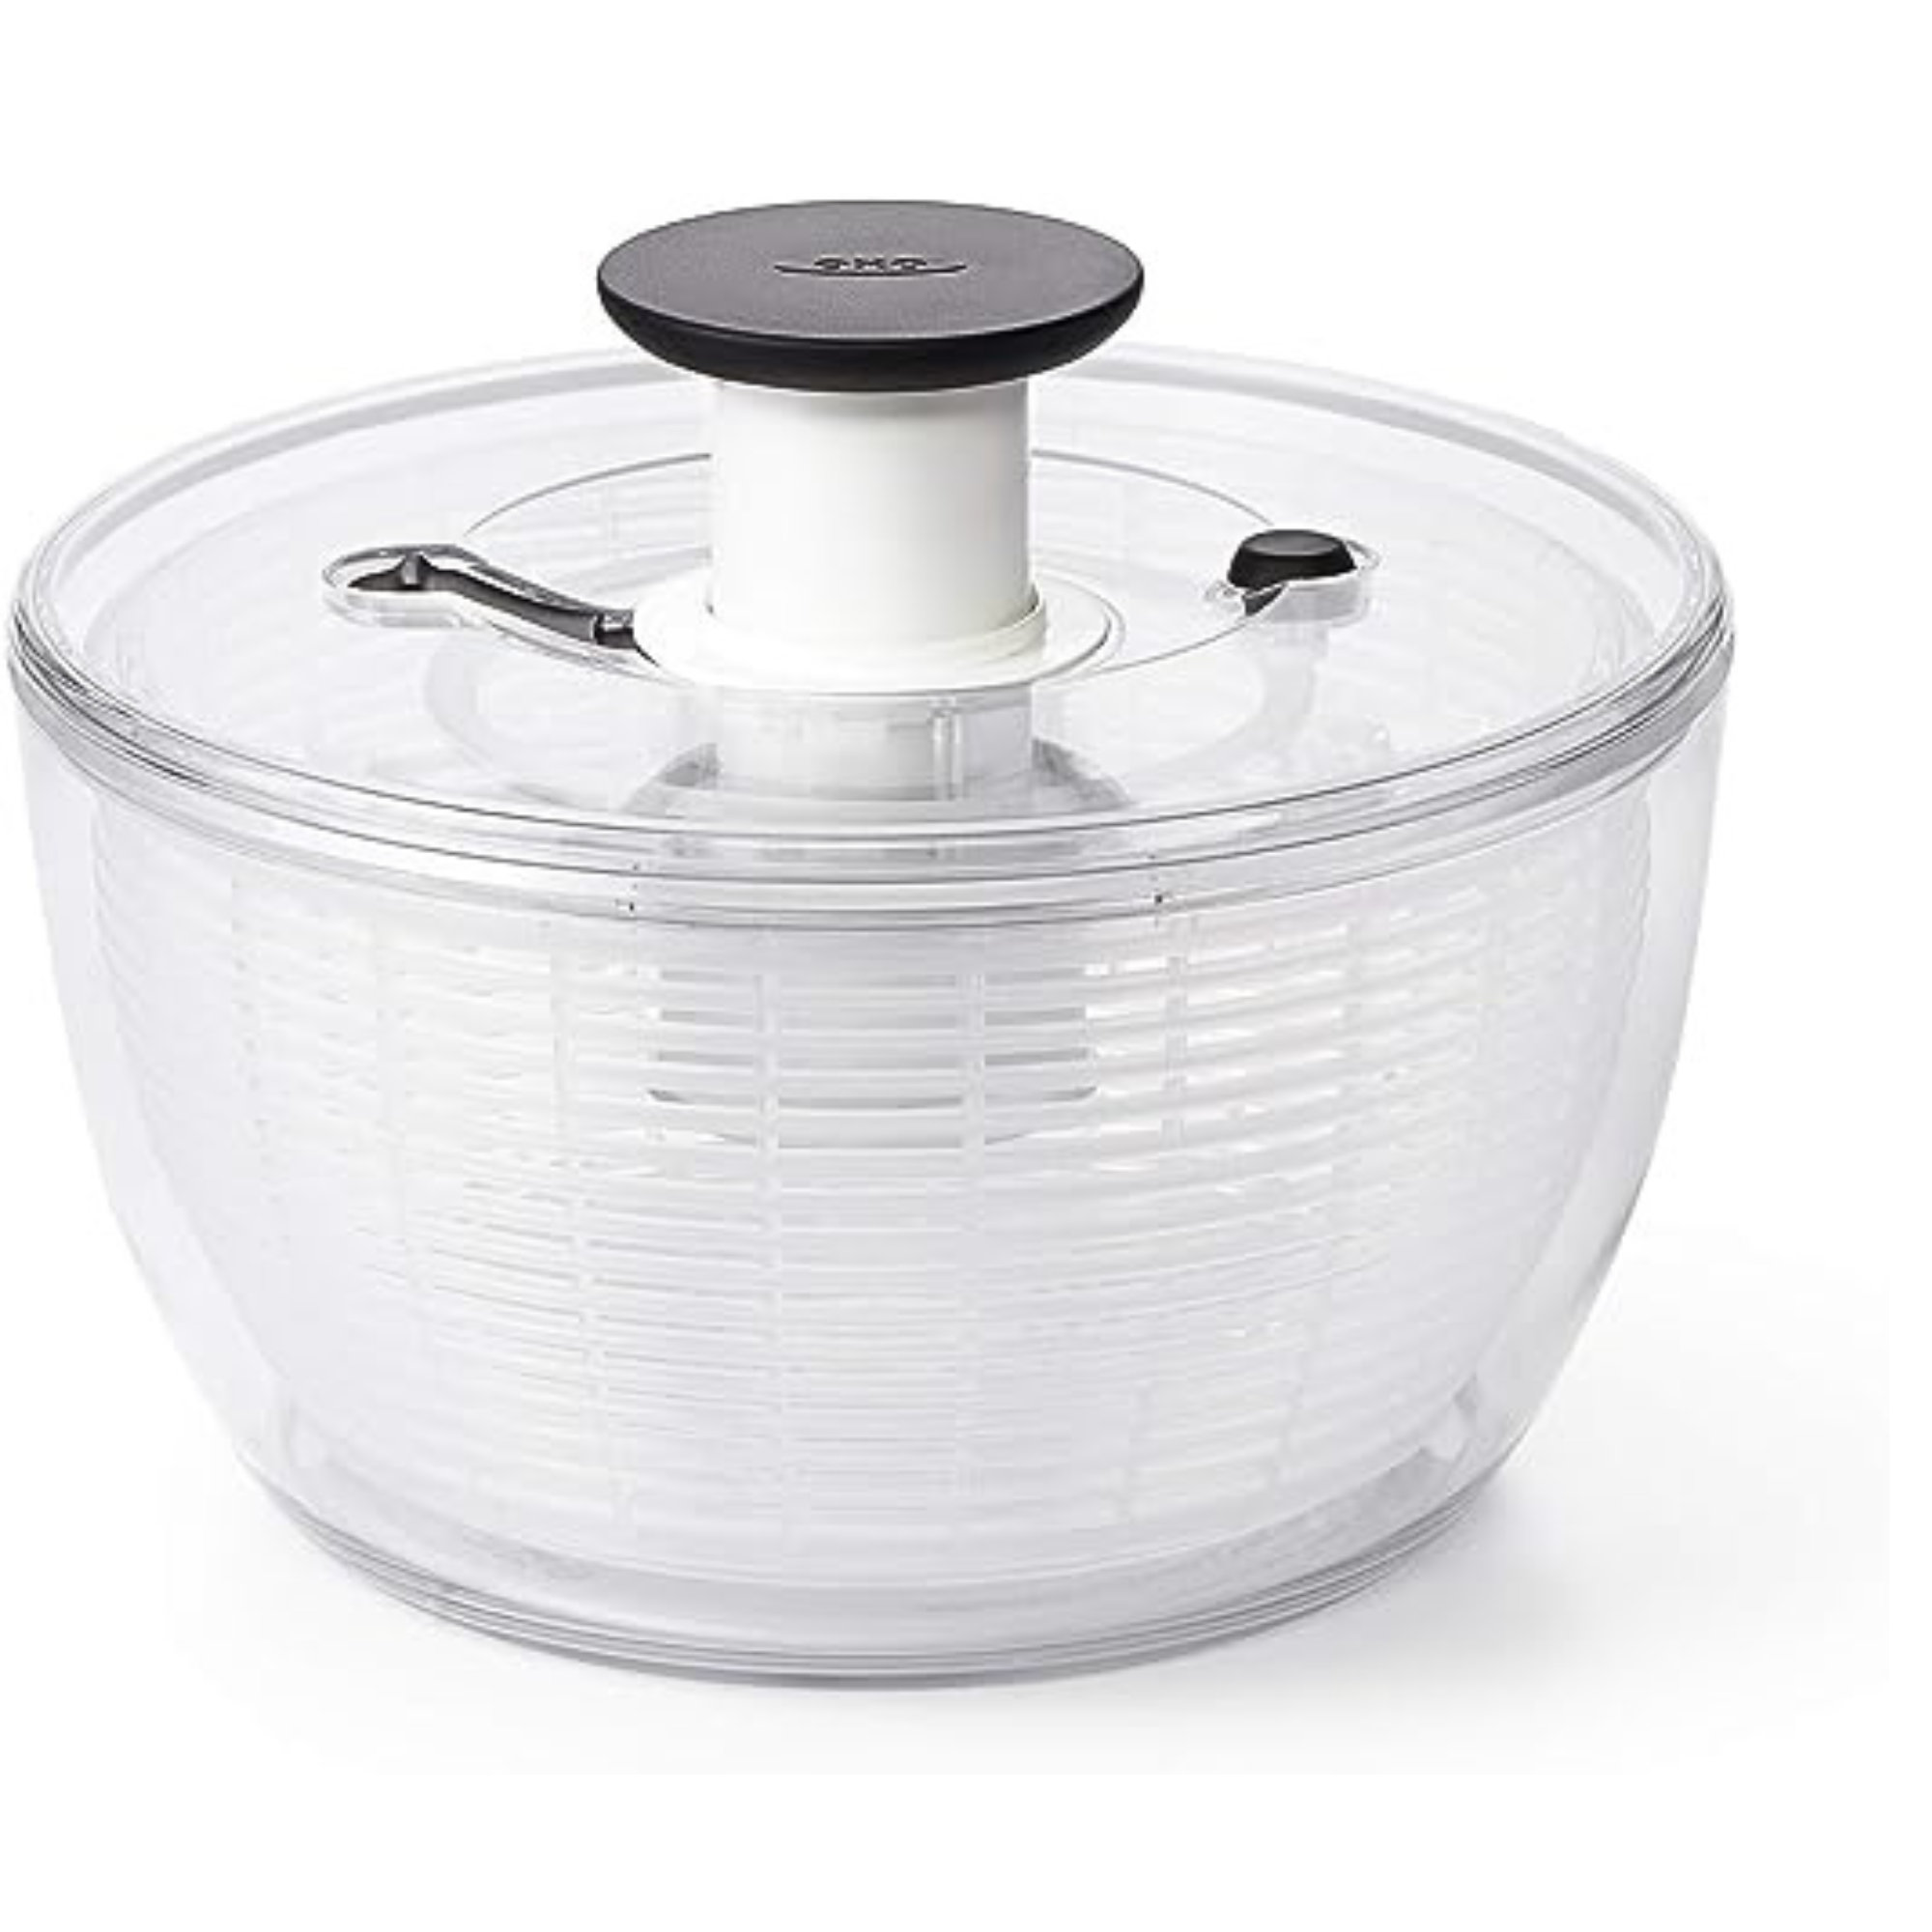 KitchenAid Universal Salad Spinner with Pump Mechanism and Large Bowl, 7.43 Quart, Empire